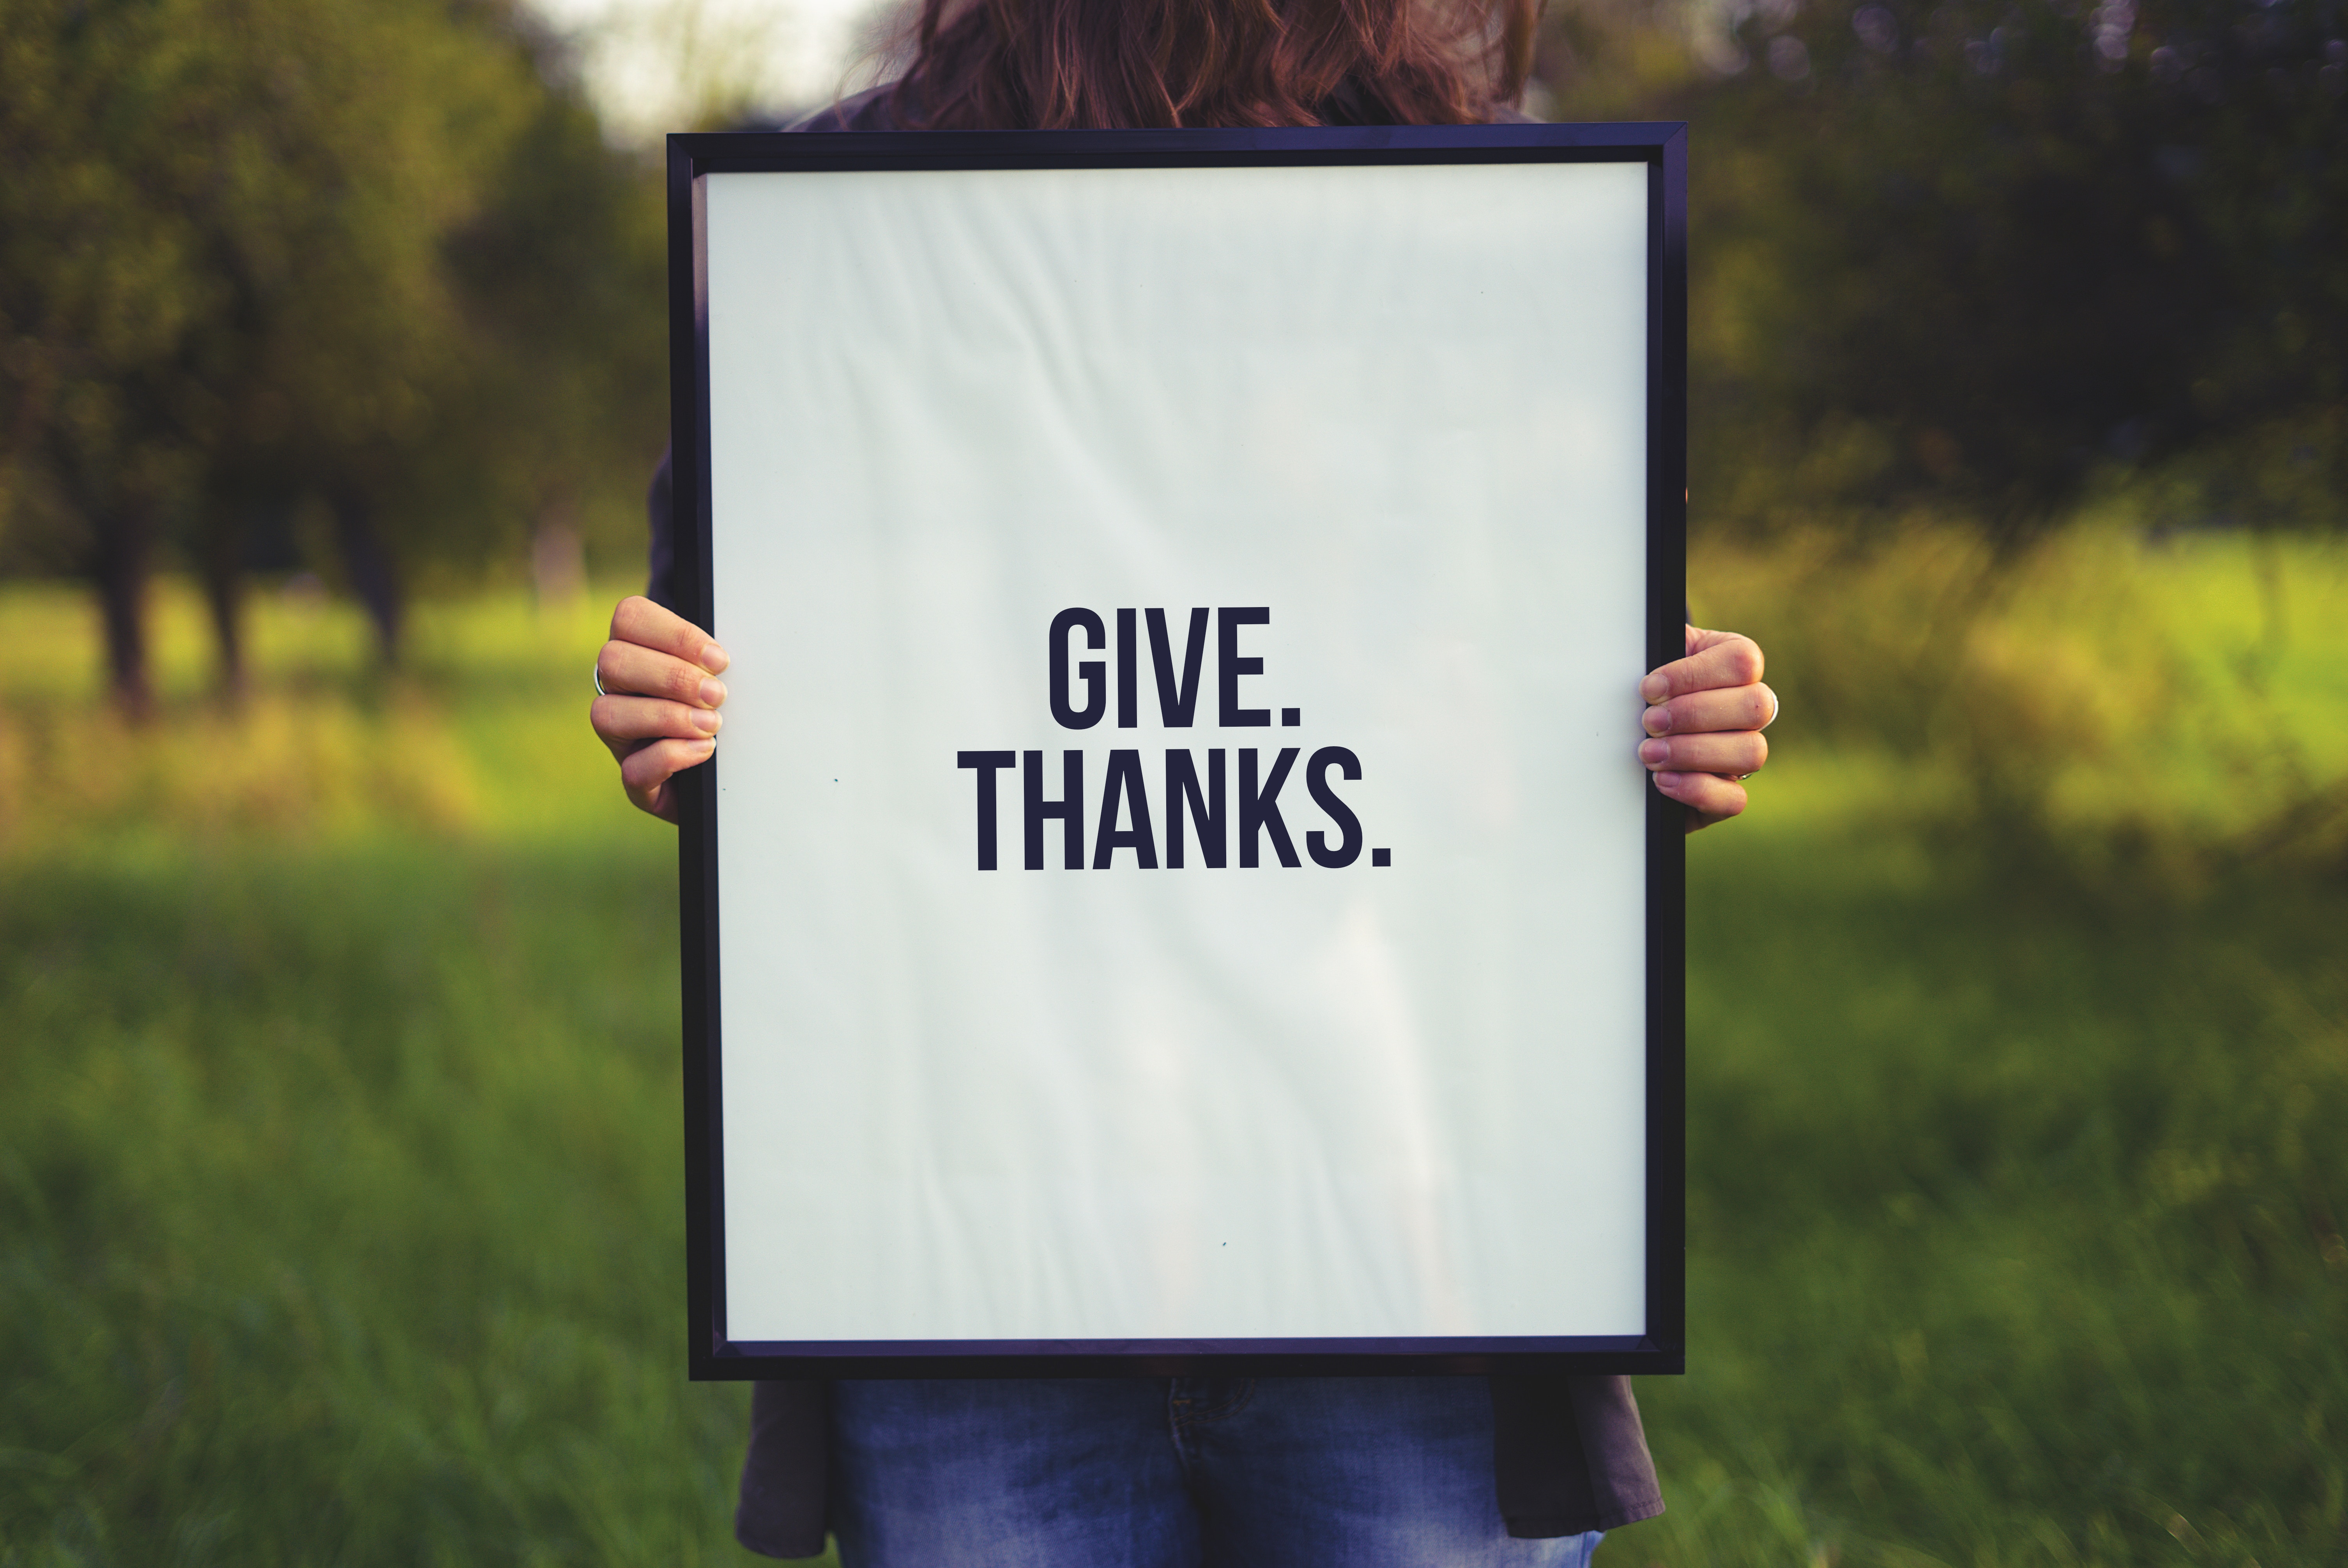 What are you thankful for this year?